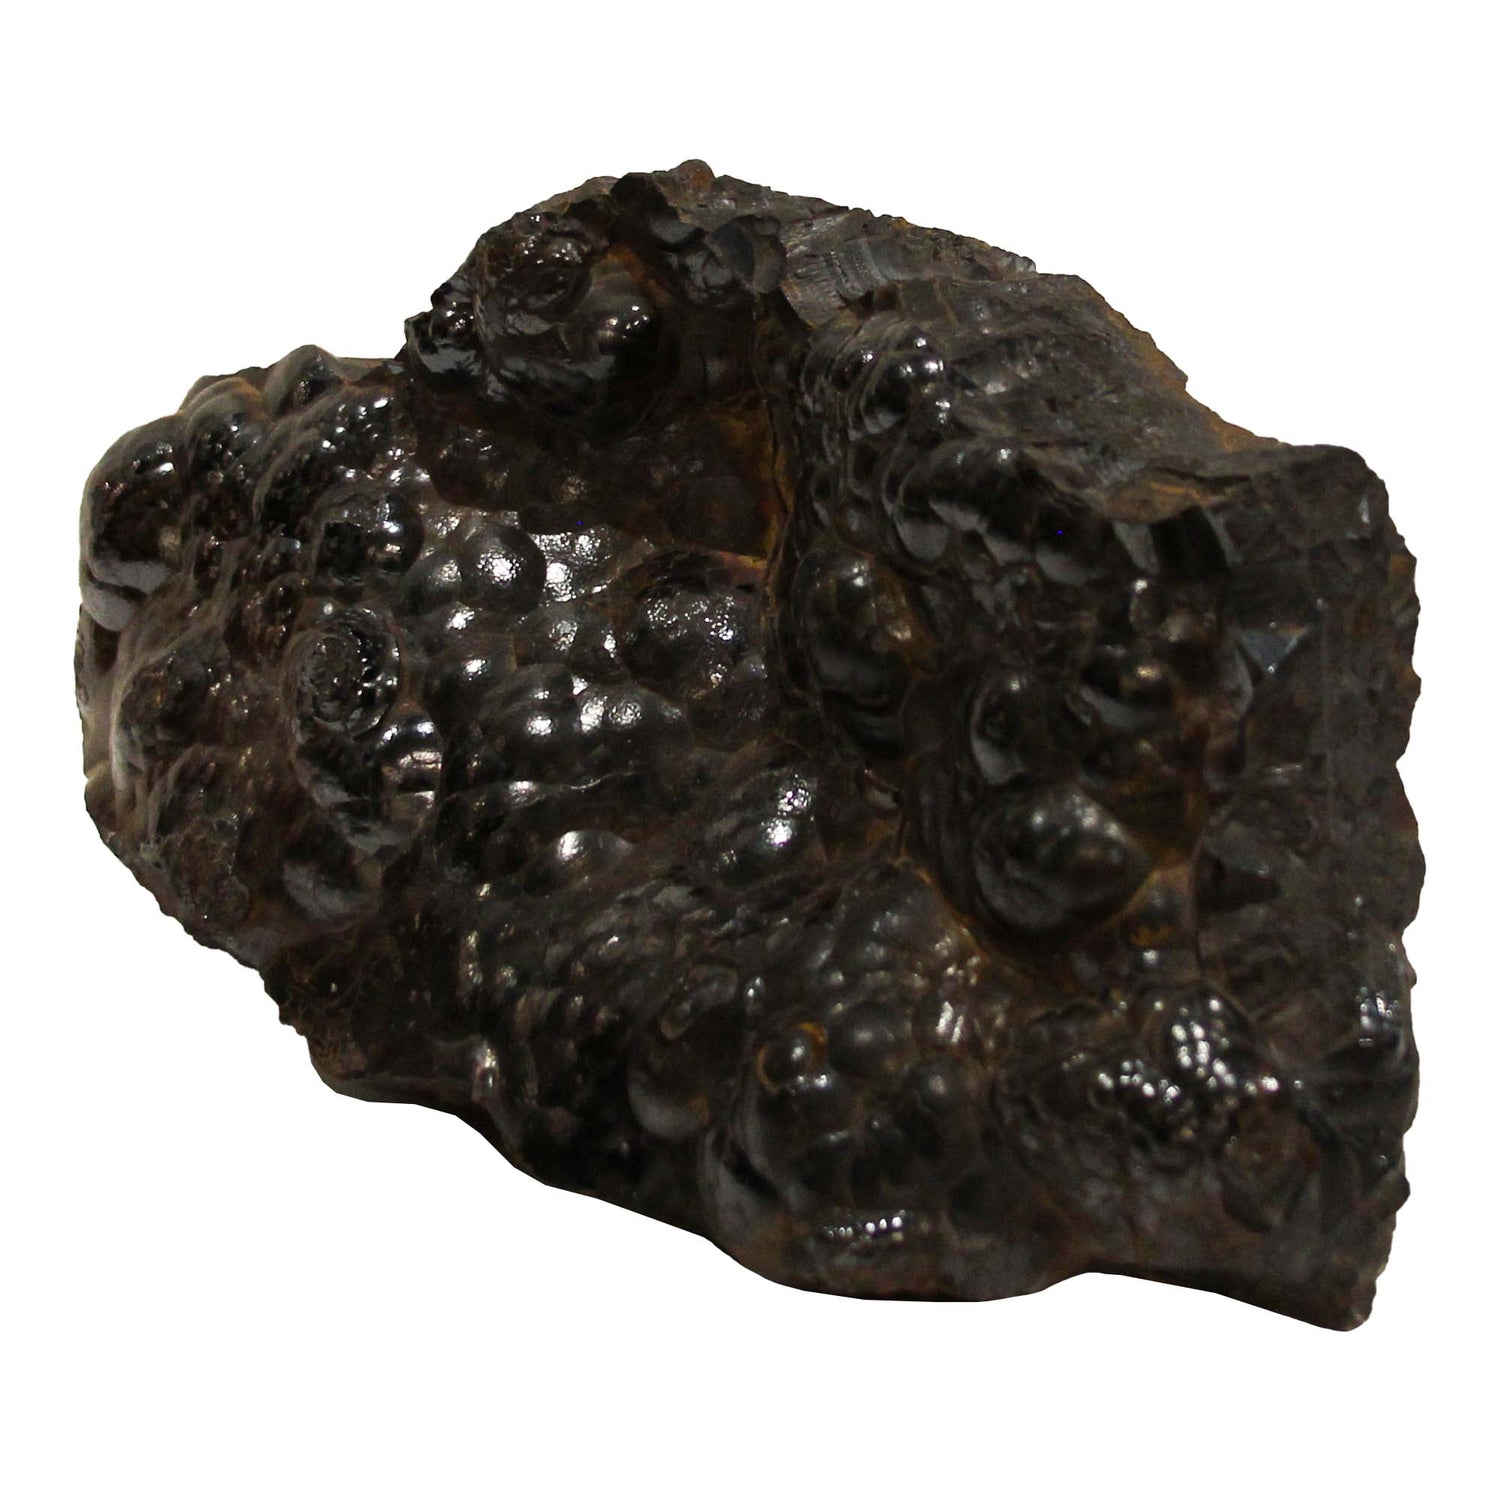 Botryoidal Hematite Cluster Front